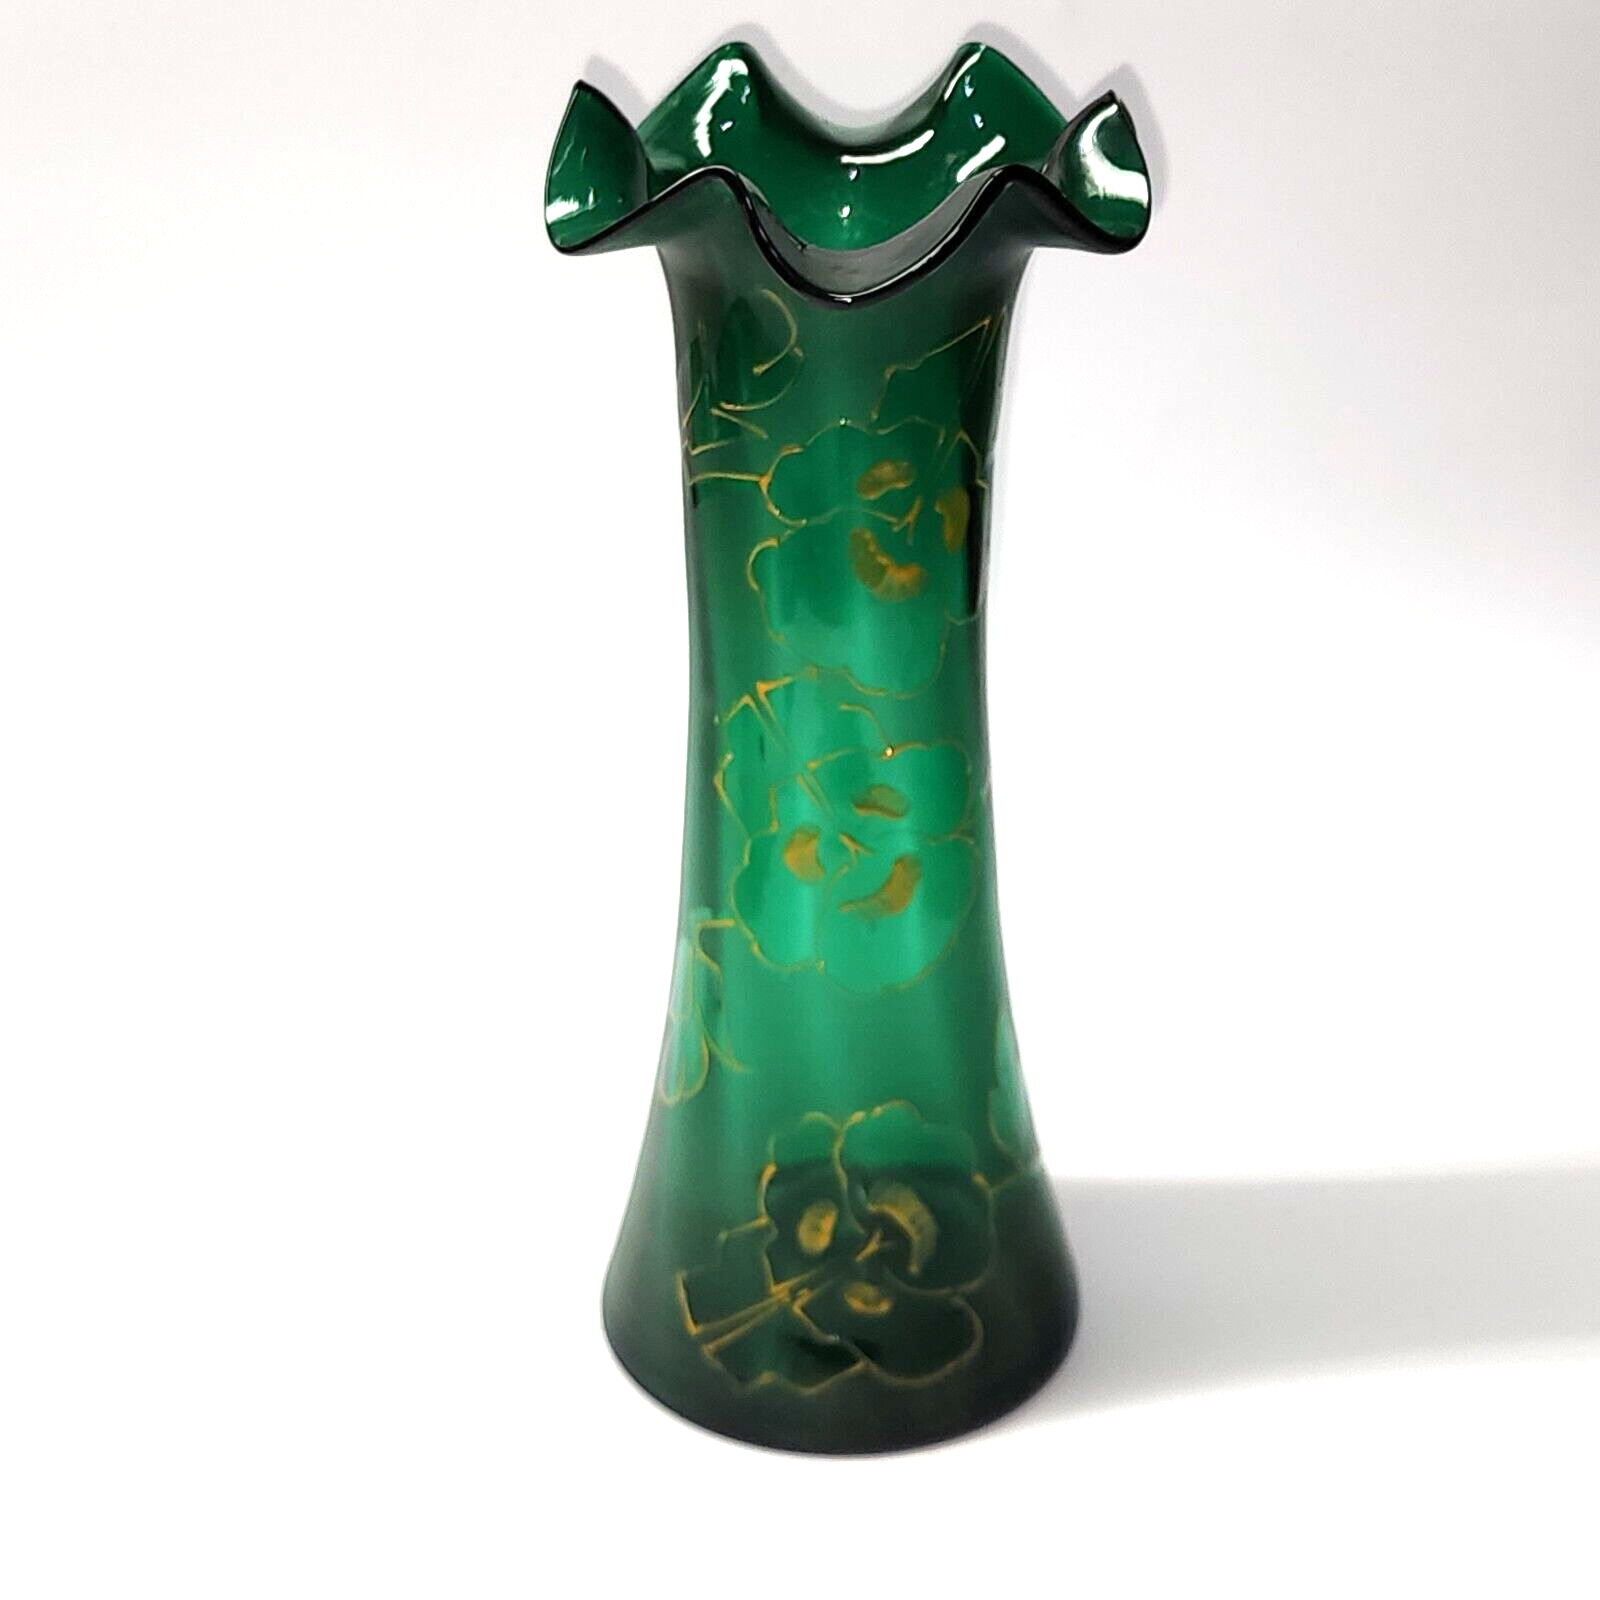 Primary image for Vintage Art Nouveau 10½” Vase - Hand Blown, Deep Emerald Green & Gold - Unmarked